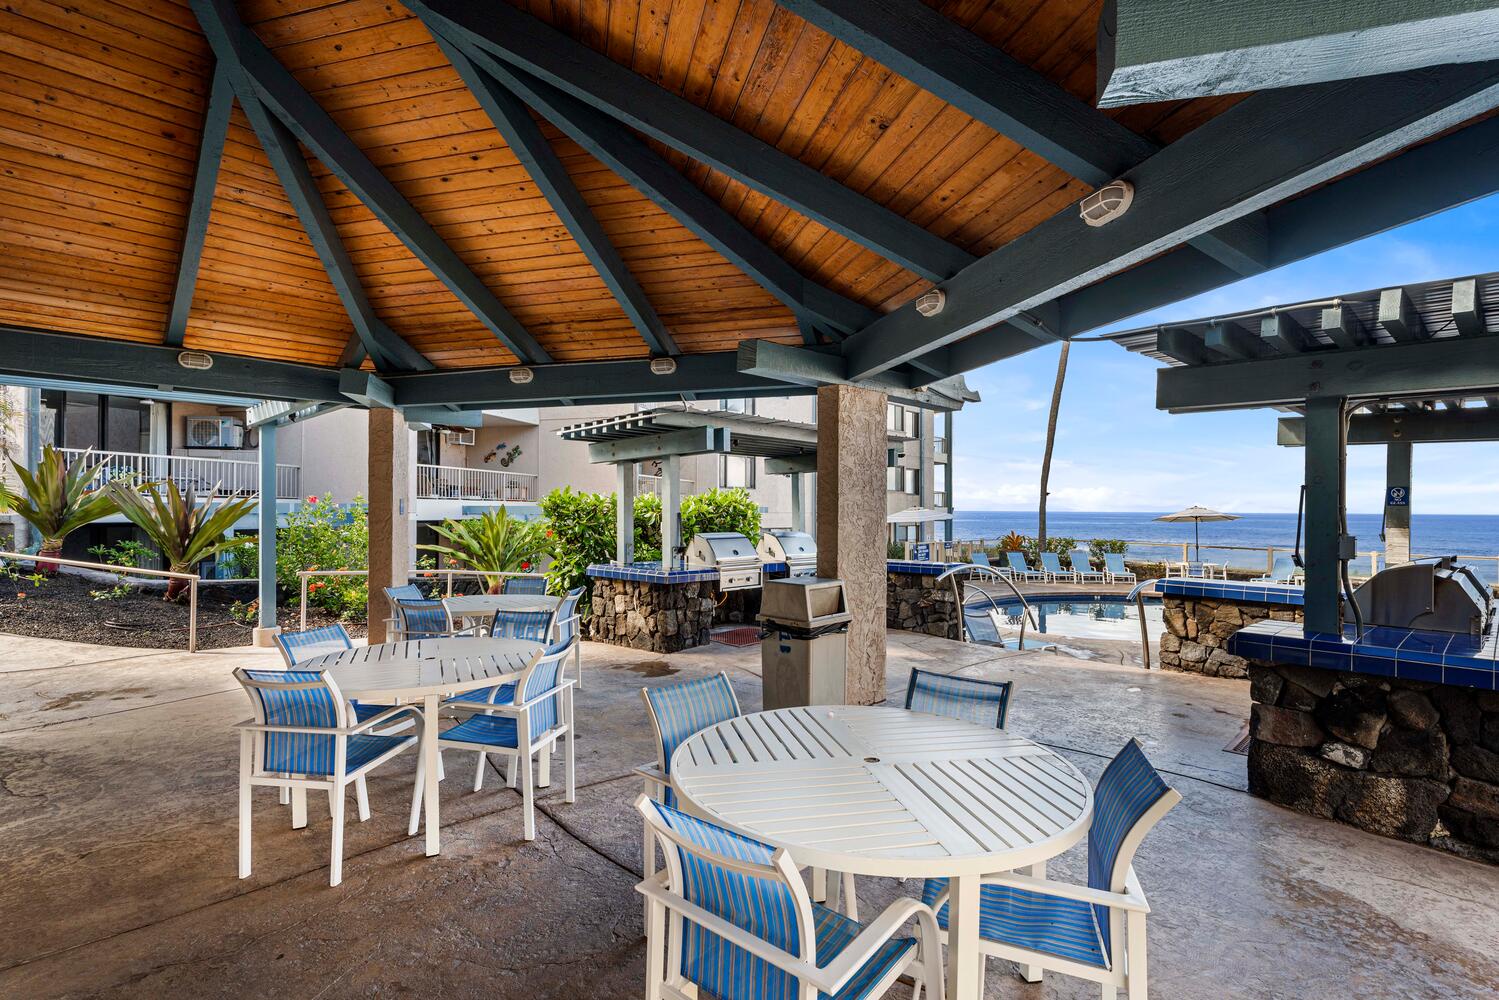 Kailua Kona Vacation Rentals, Kona Reef F23 - Alfresco dining with an oceanfront view by the pool at the community area.